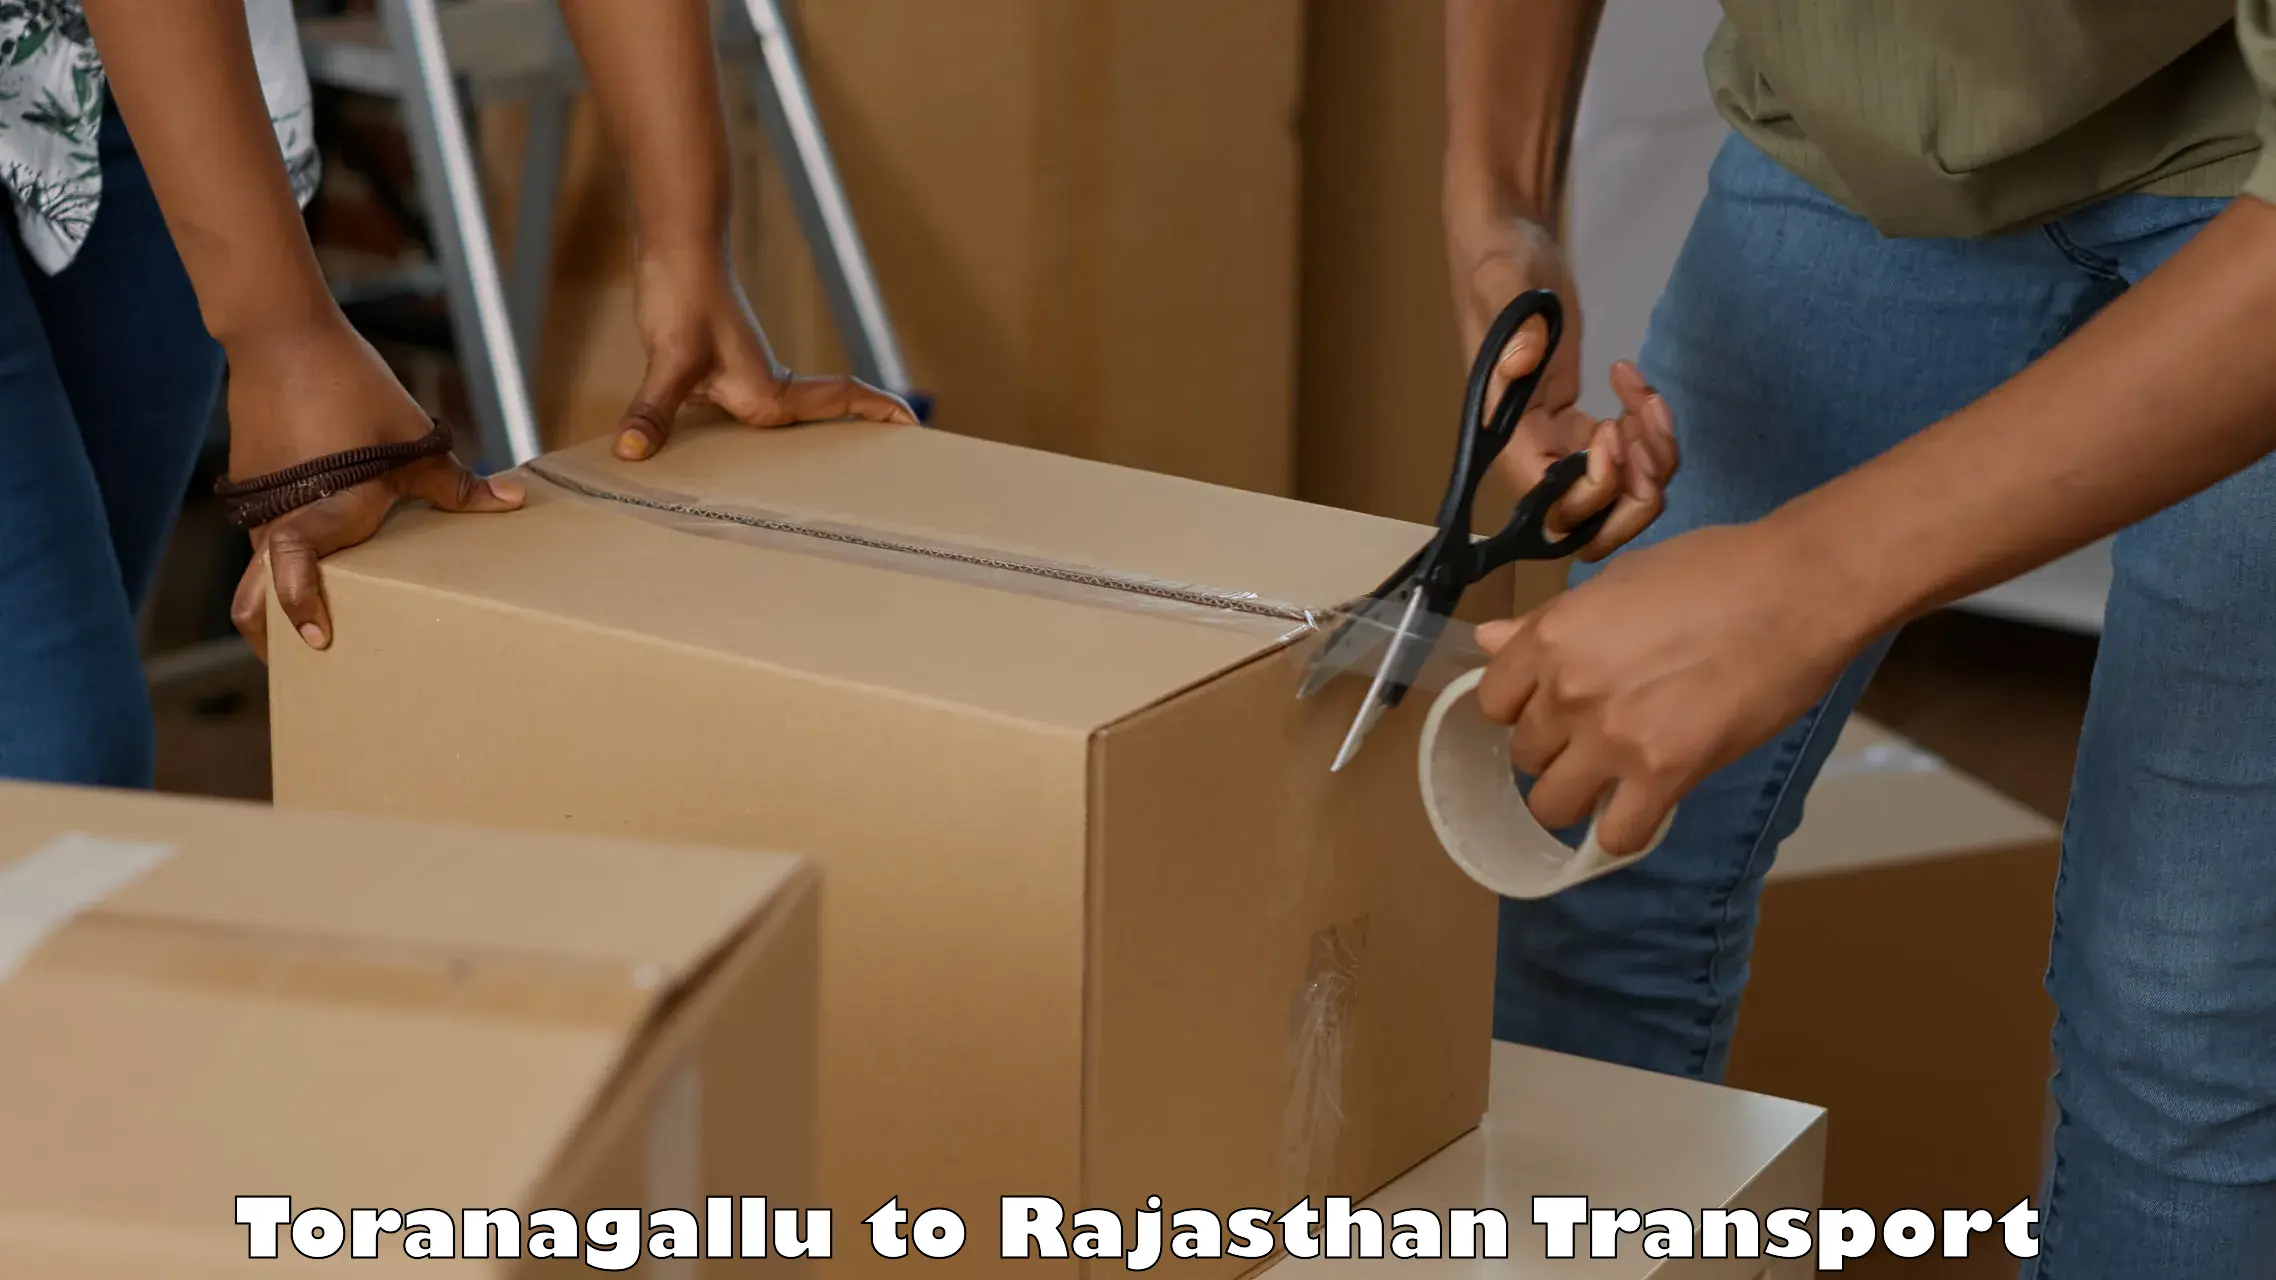 Container transport service Toranagallu to Piparcity